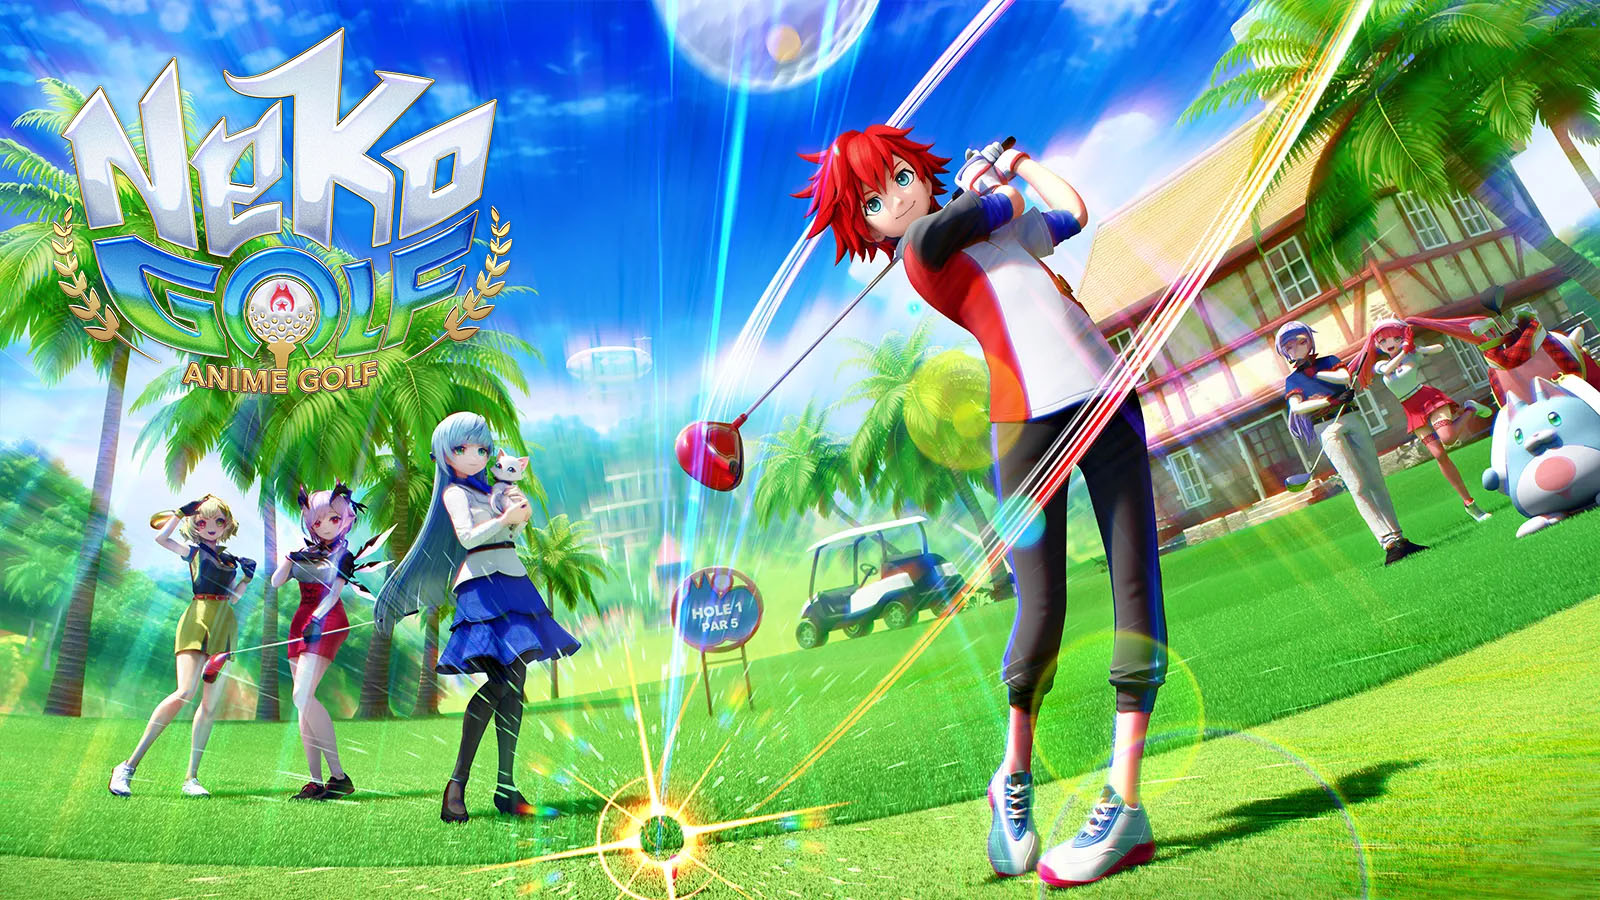 NEKO GOLF: Anime GOLF launches in October worldwide for iOS, Android